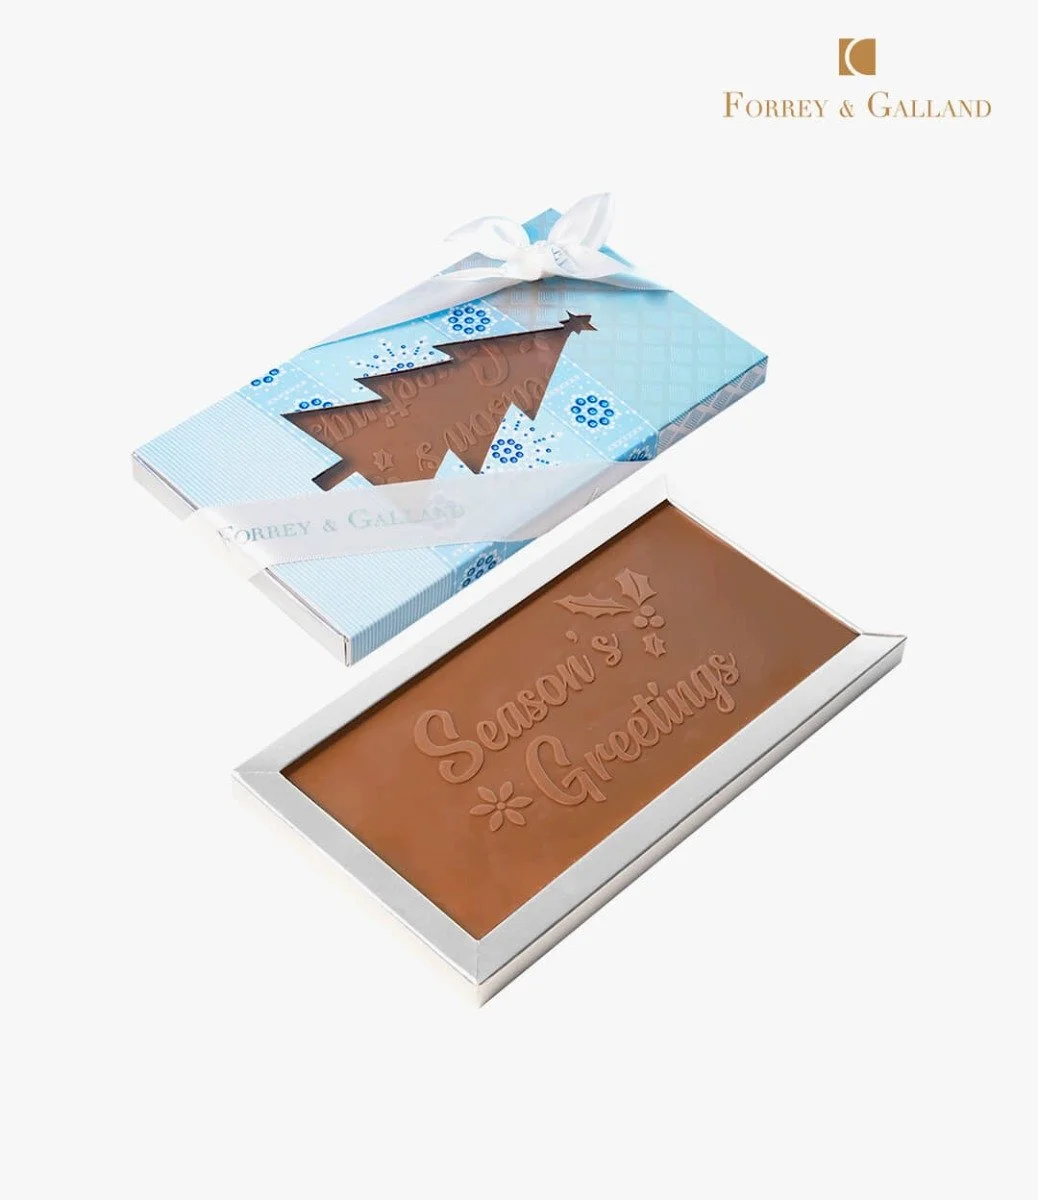 Engraved Chocolate Tablet By Forrey & Galland